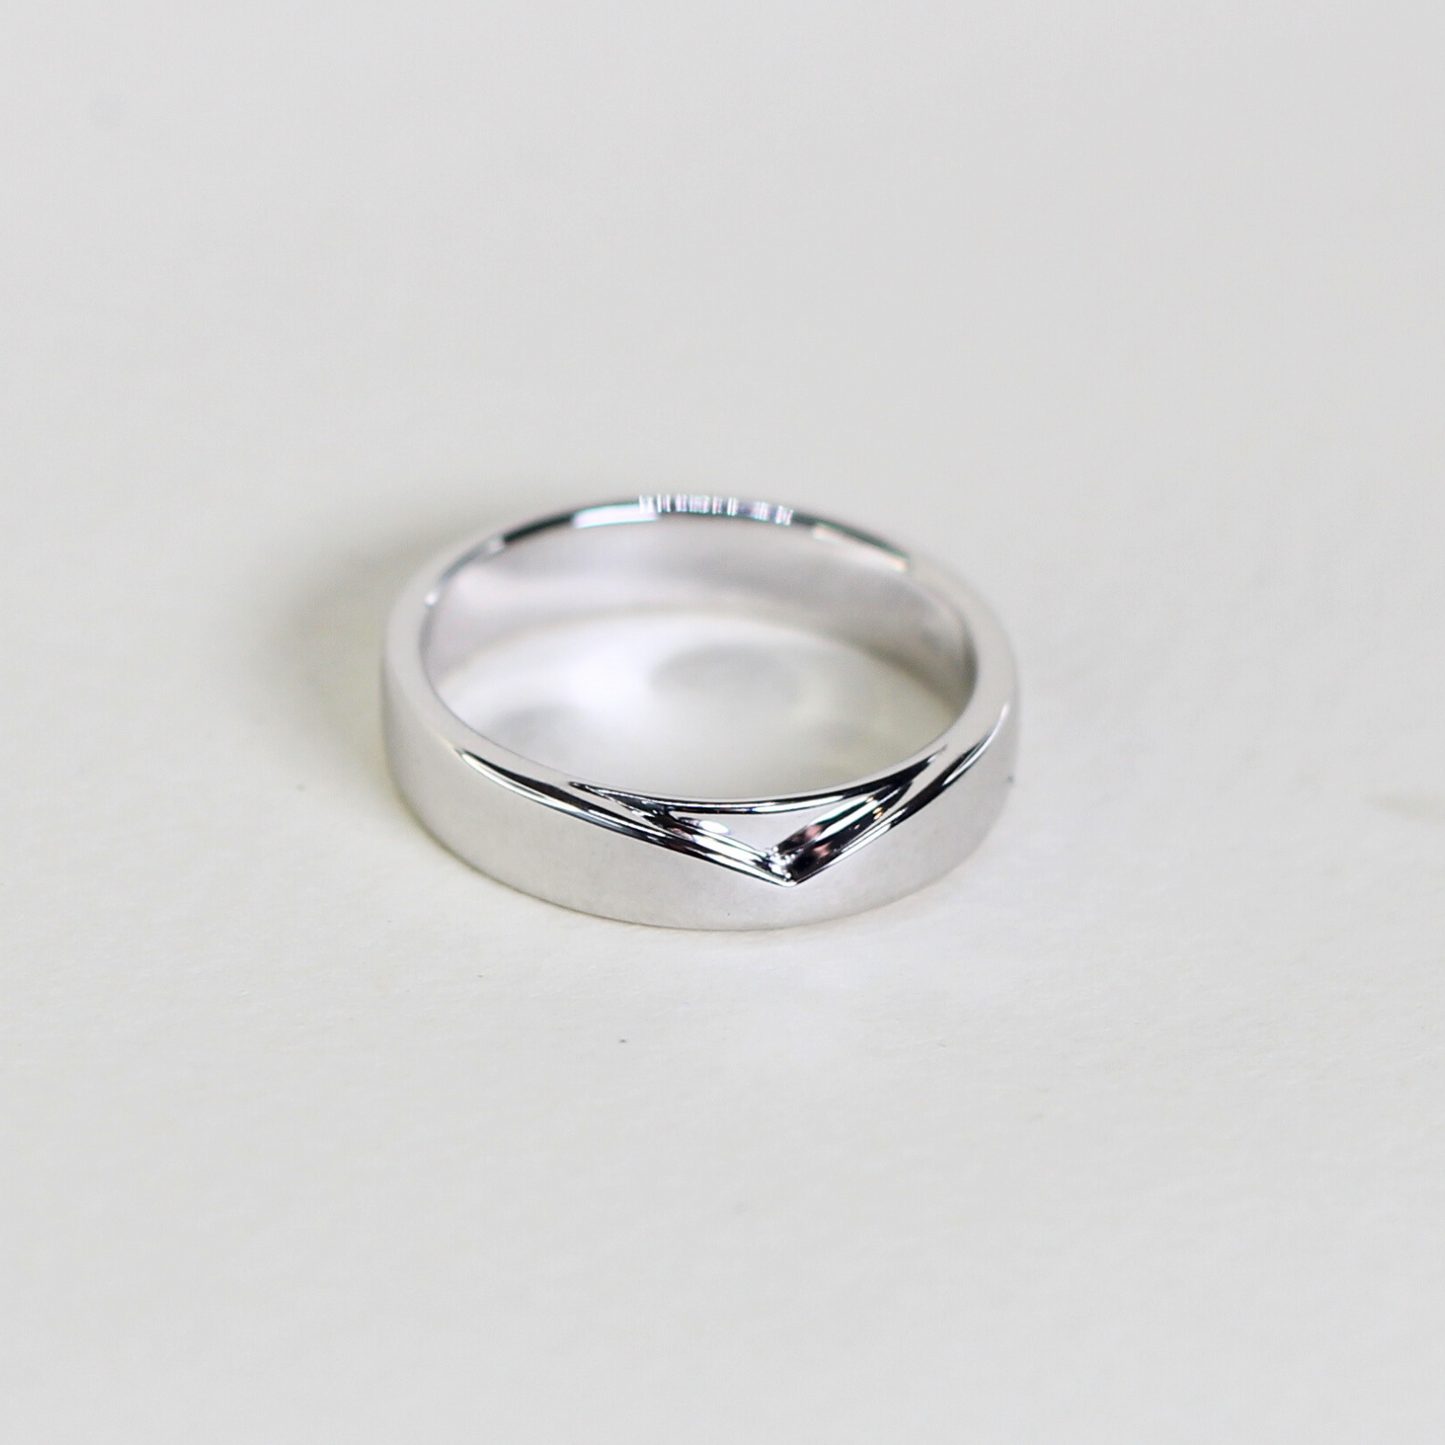 Plain Male wedding band with V-shaped accent